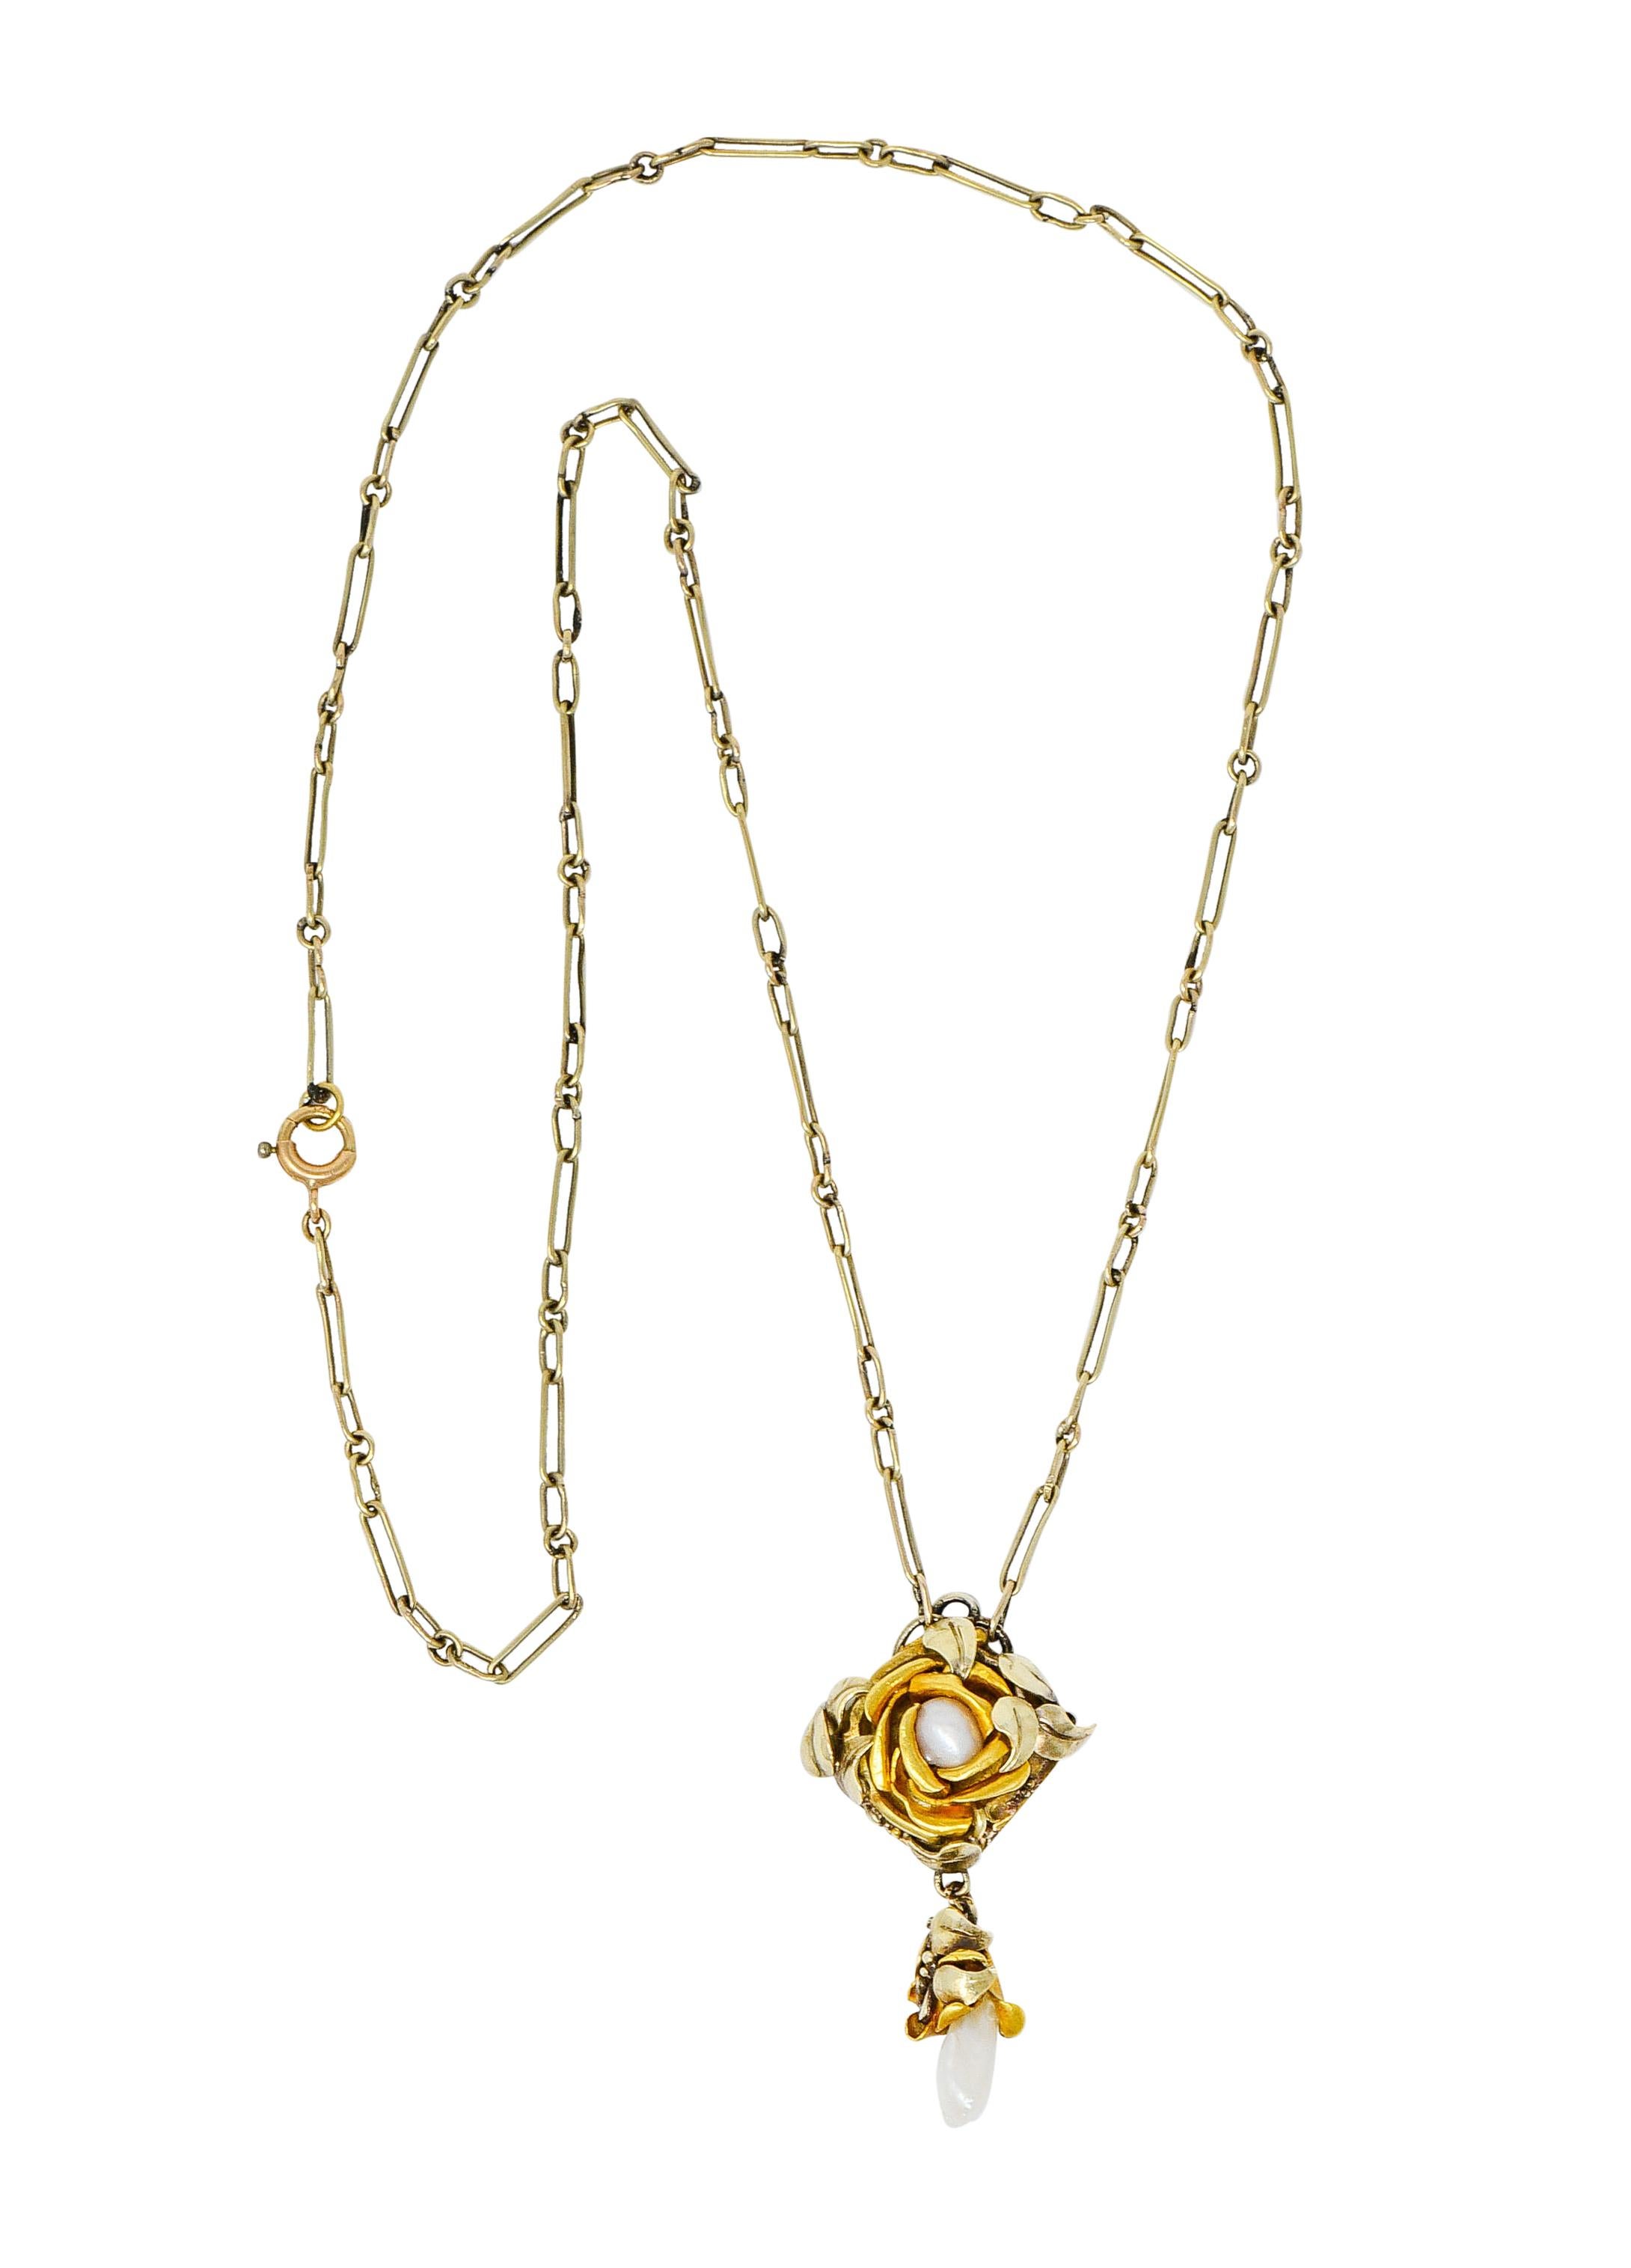 Paperclip style chain centers a fabricated rose comprised of yellow and green gold petals and leaves

Centering a semi-baroque oval pearl, white in color with slight rosè overtones and very good luster

Suspending a matching foliate drop accented by